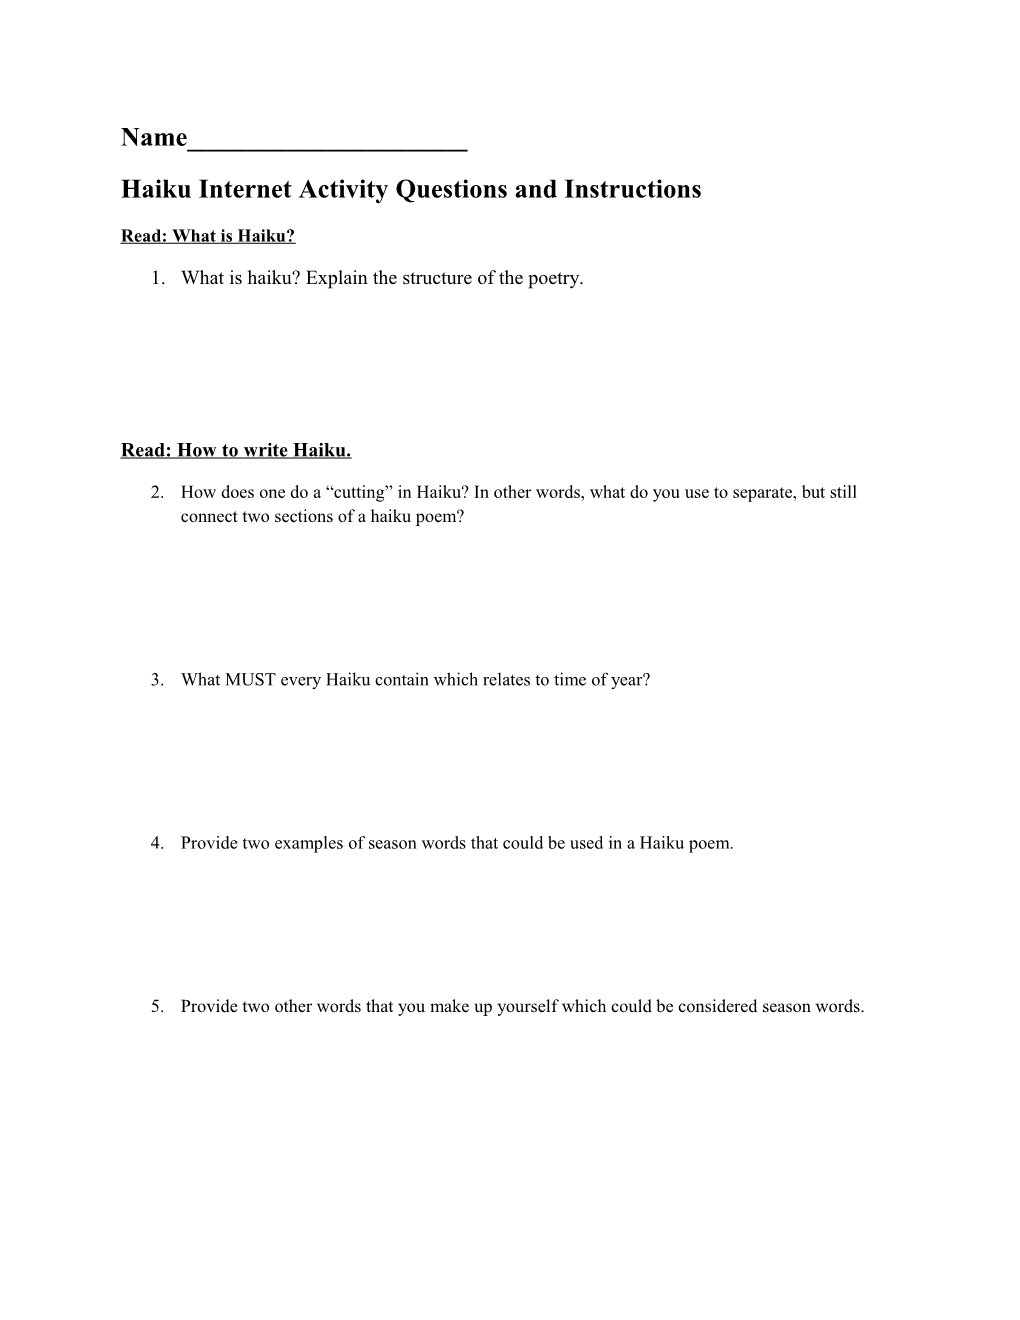 Haiku Internet Activity Questions and Instructions